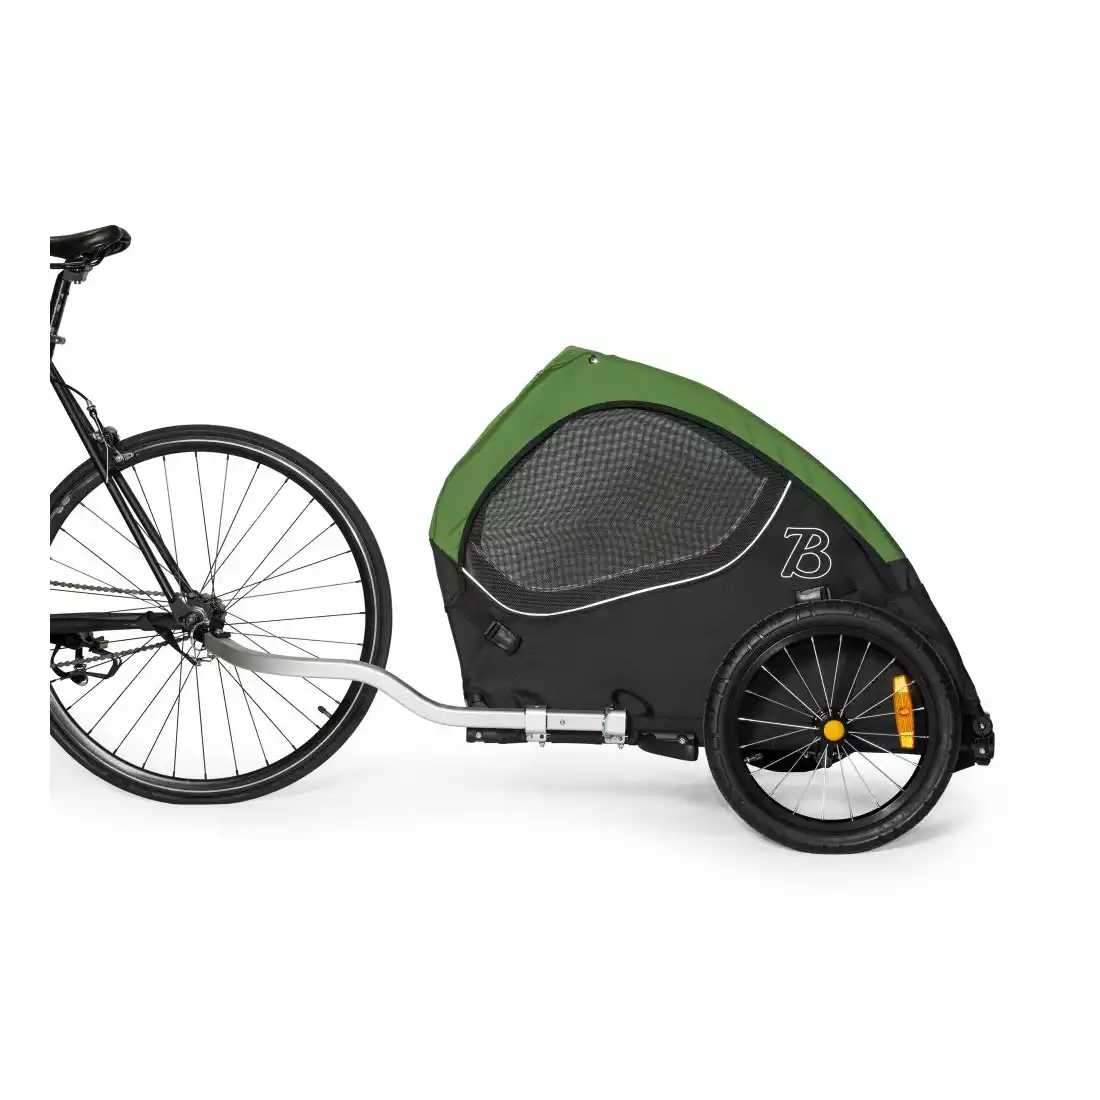 BURLEY TAIL WAGON Bicycle trailer for dogs, green